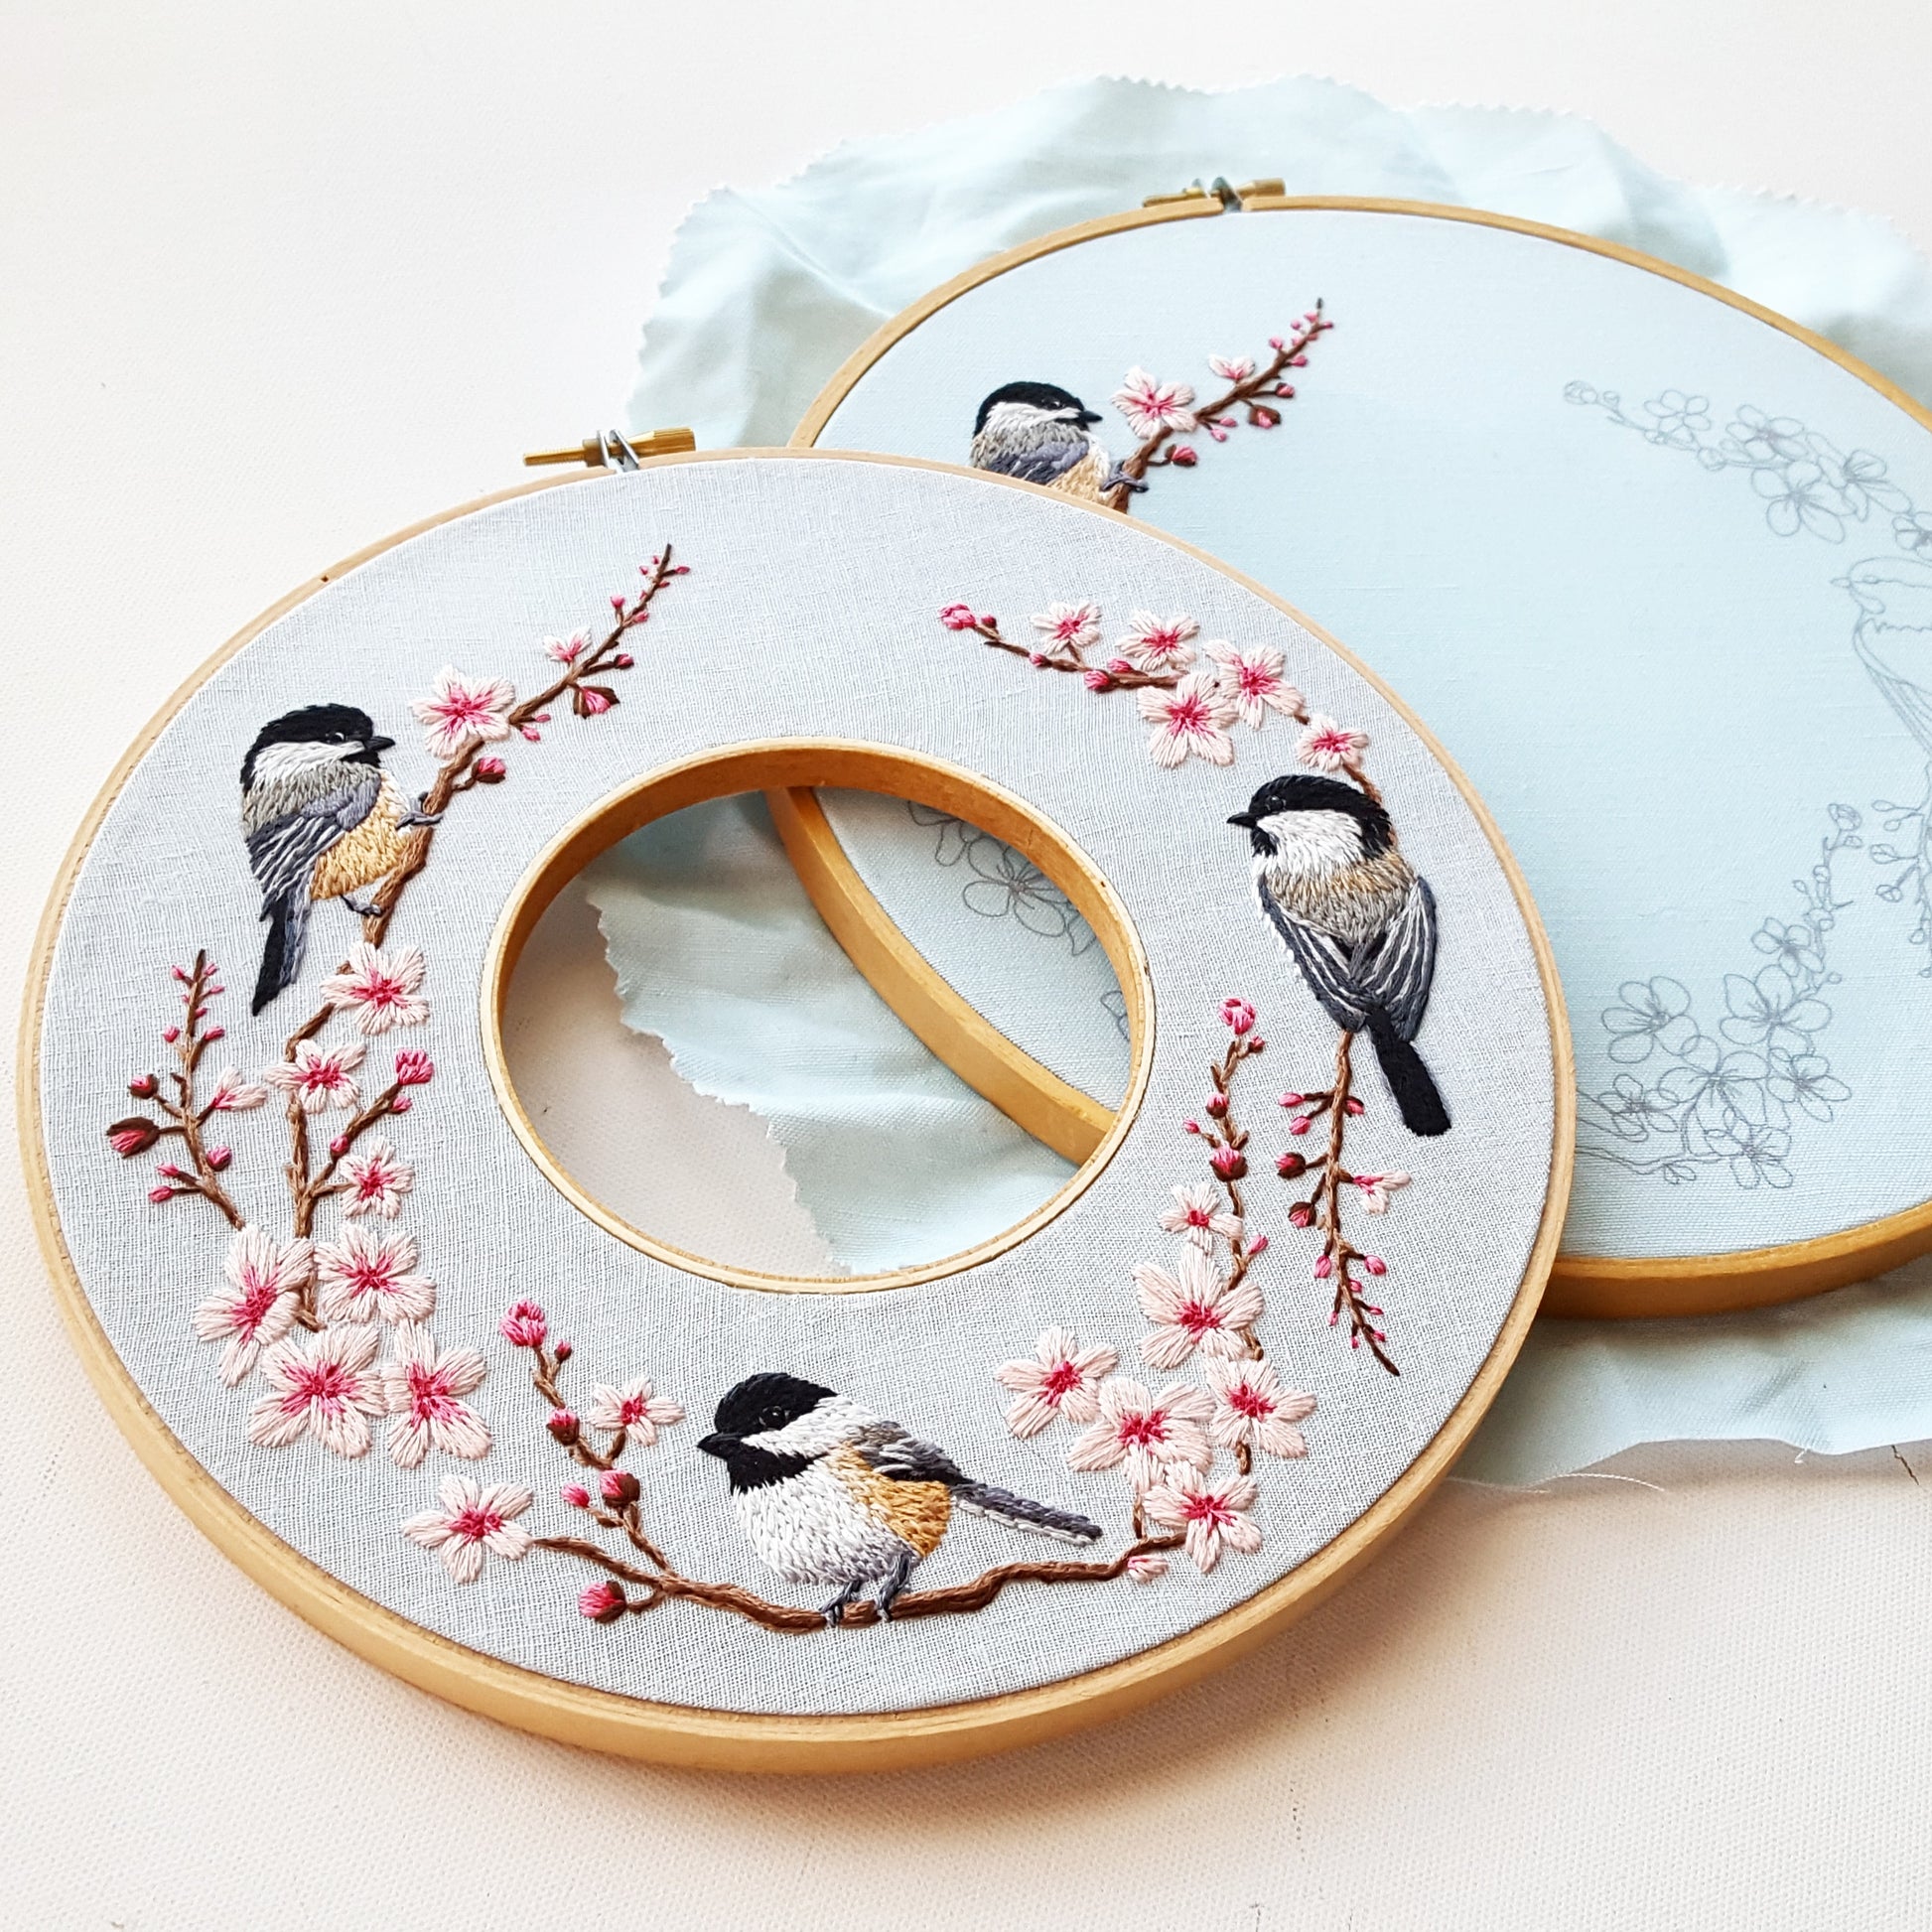 Printed Fabric – Jessica Long Embroidery